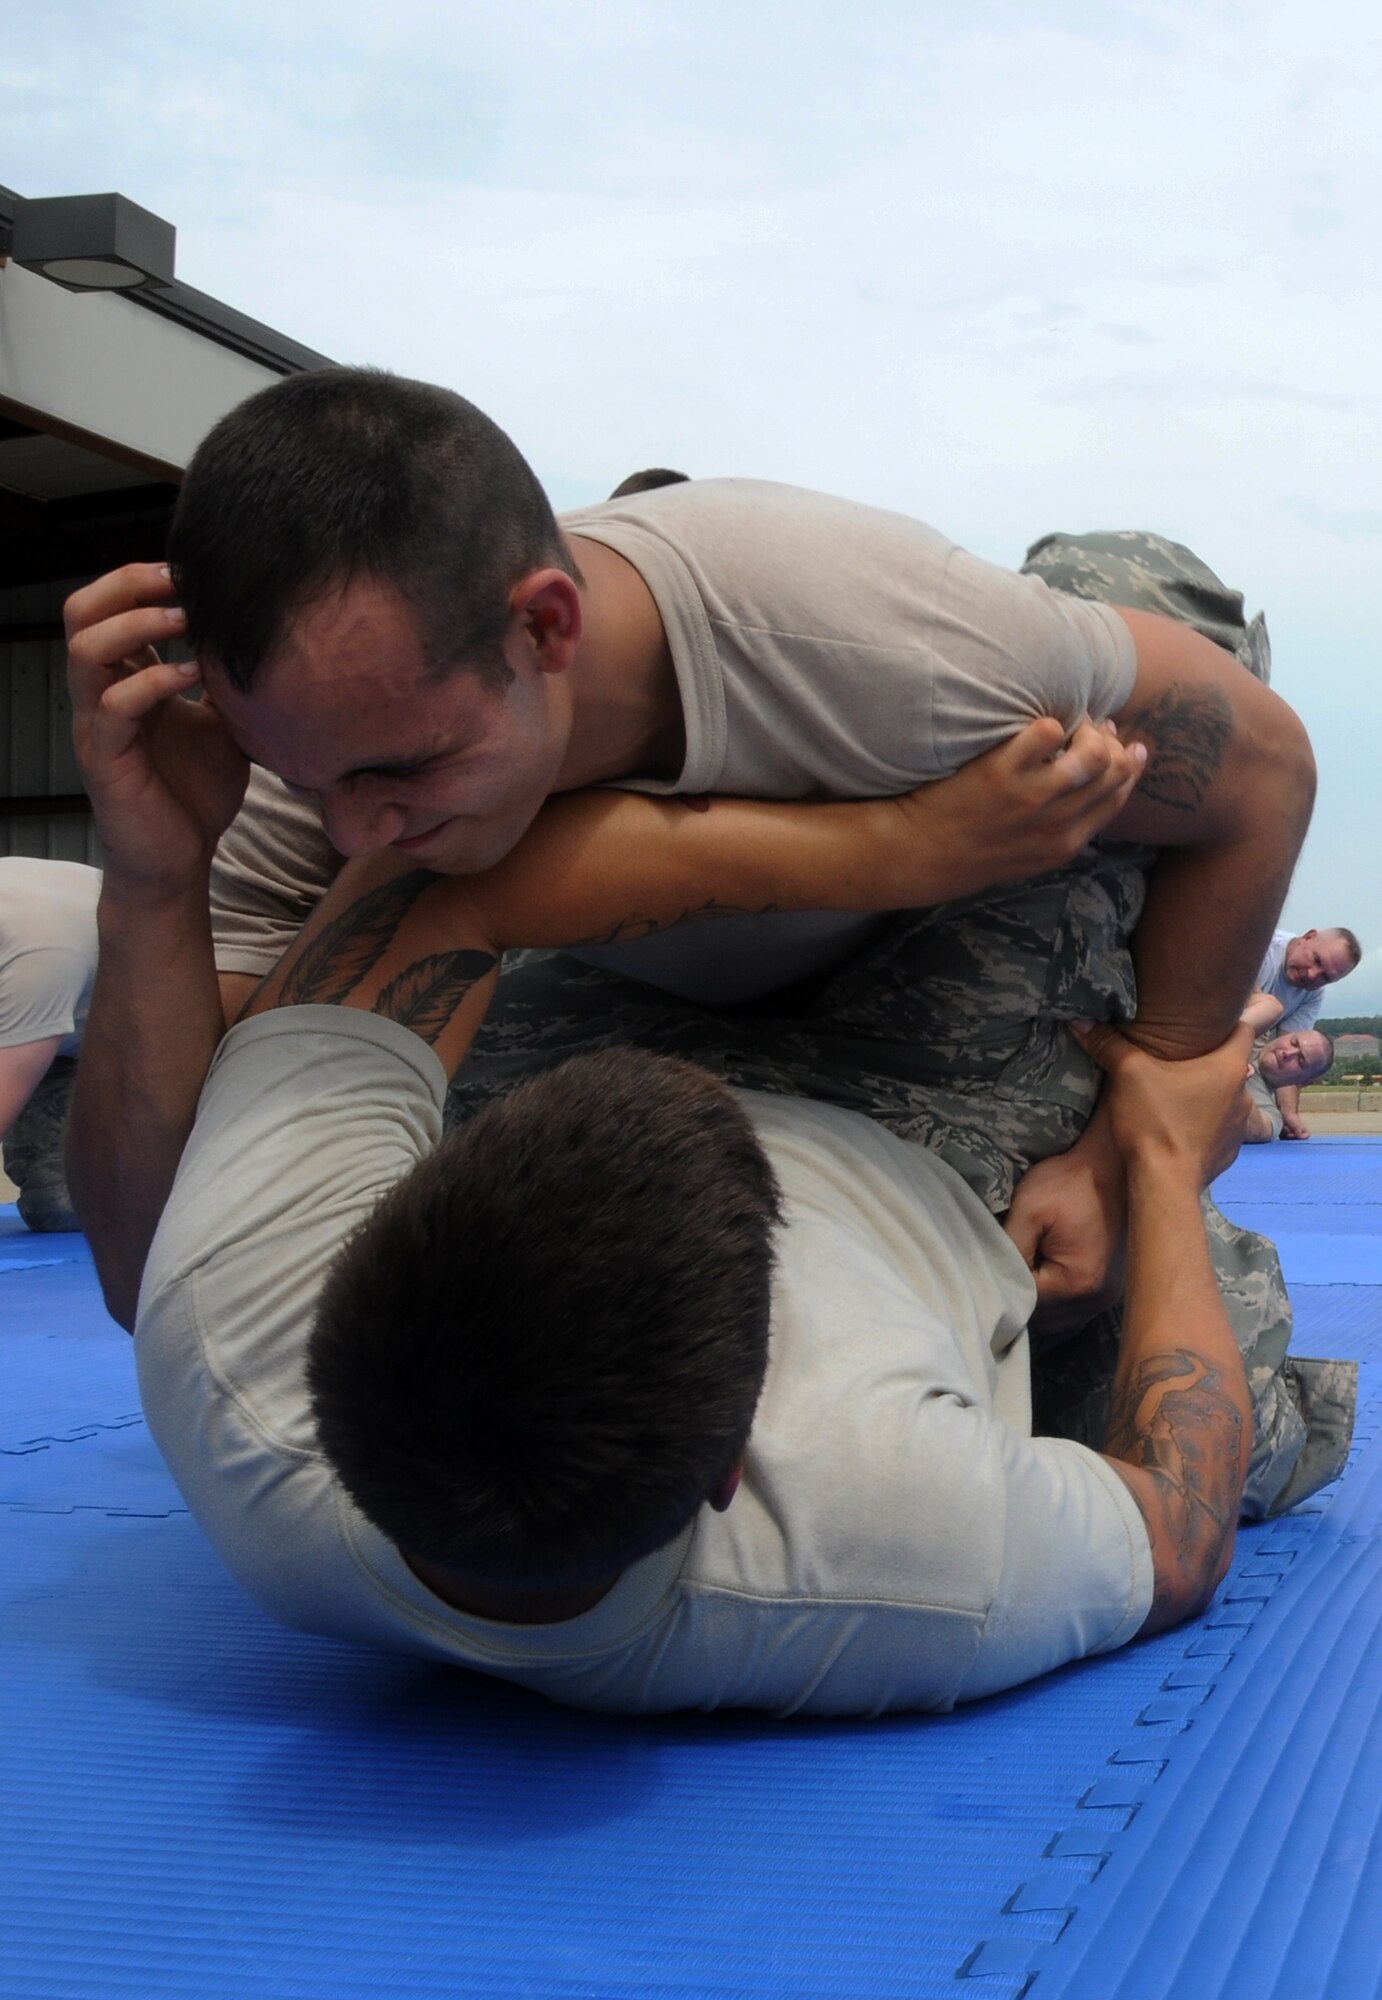 Members of the 188th Security Forces Squadron go through combative training at Ebbing Air National Guard Base, Fort Smith, Arkansas on Sept. 6, 2014. (U.S. Air National Guard photo by Airman 1st Class Cody Martin/Released)